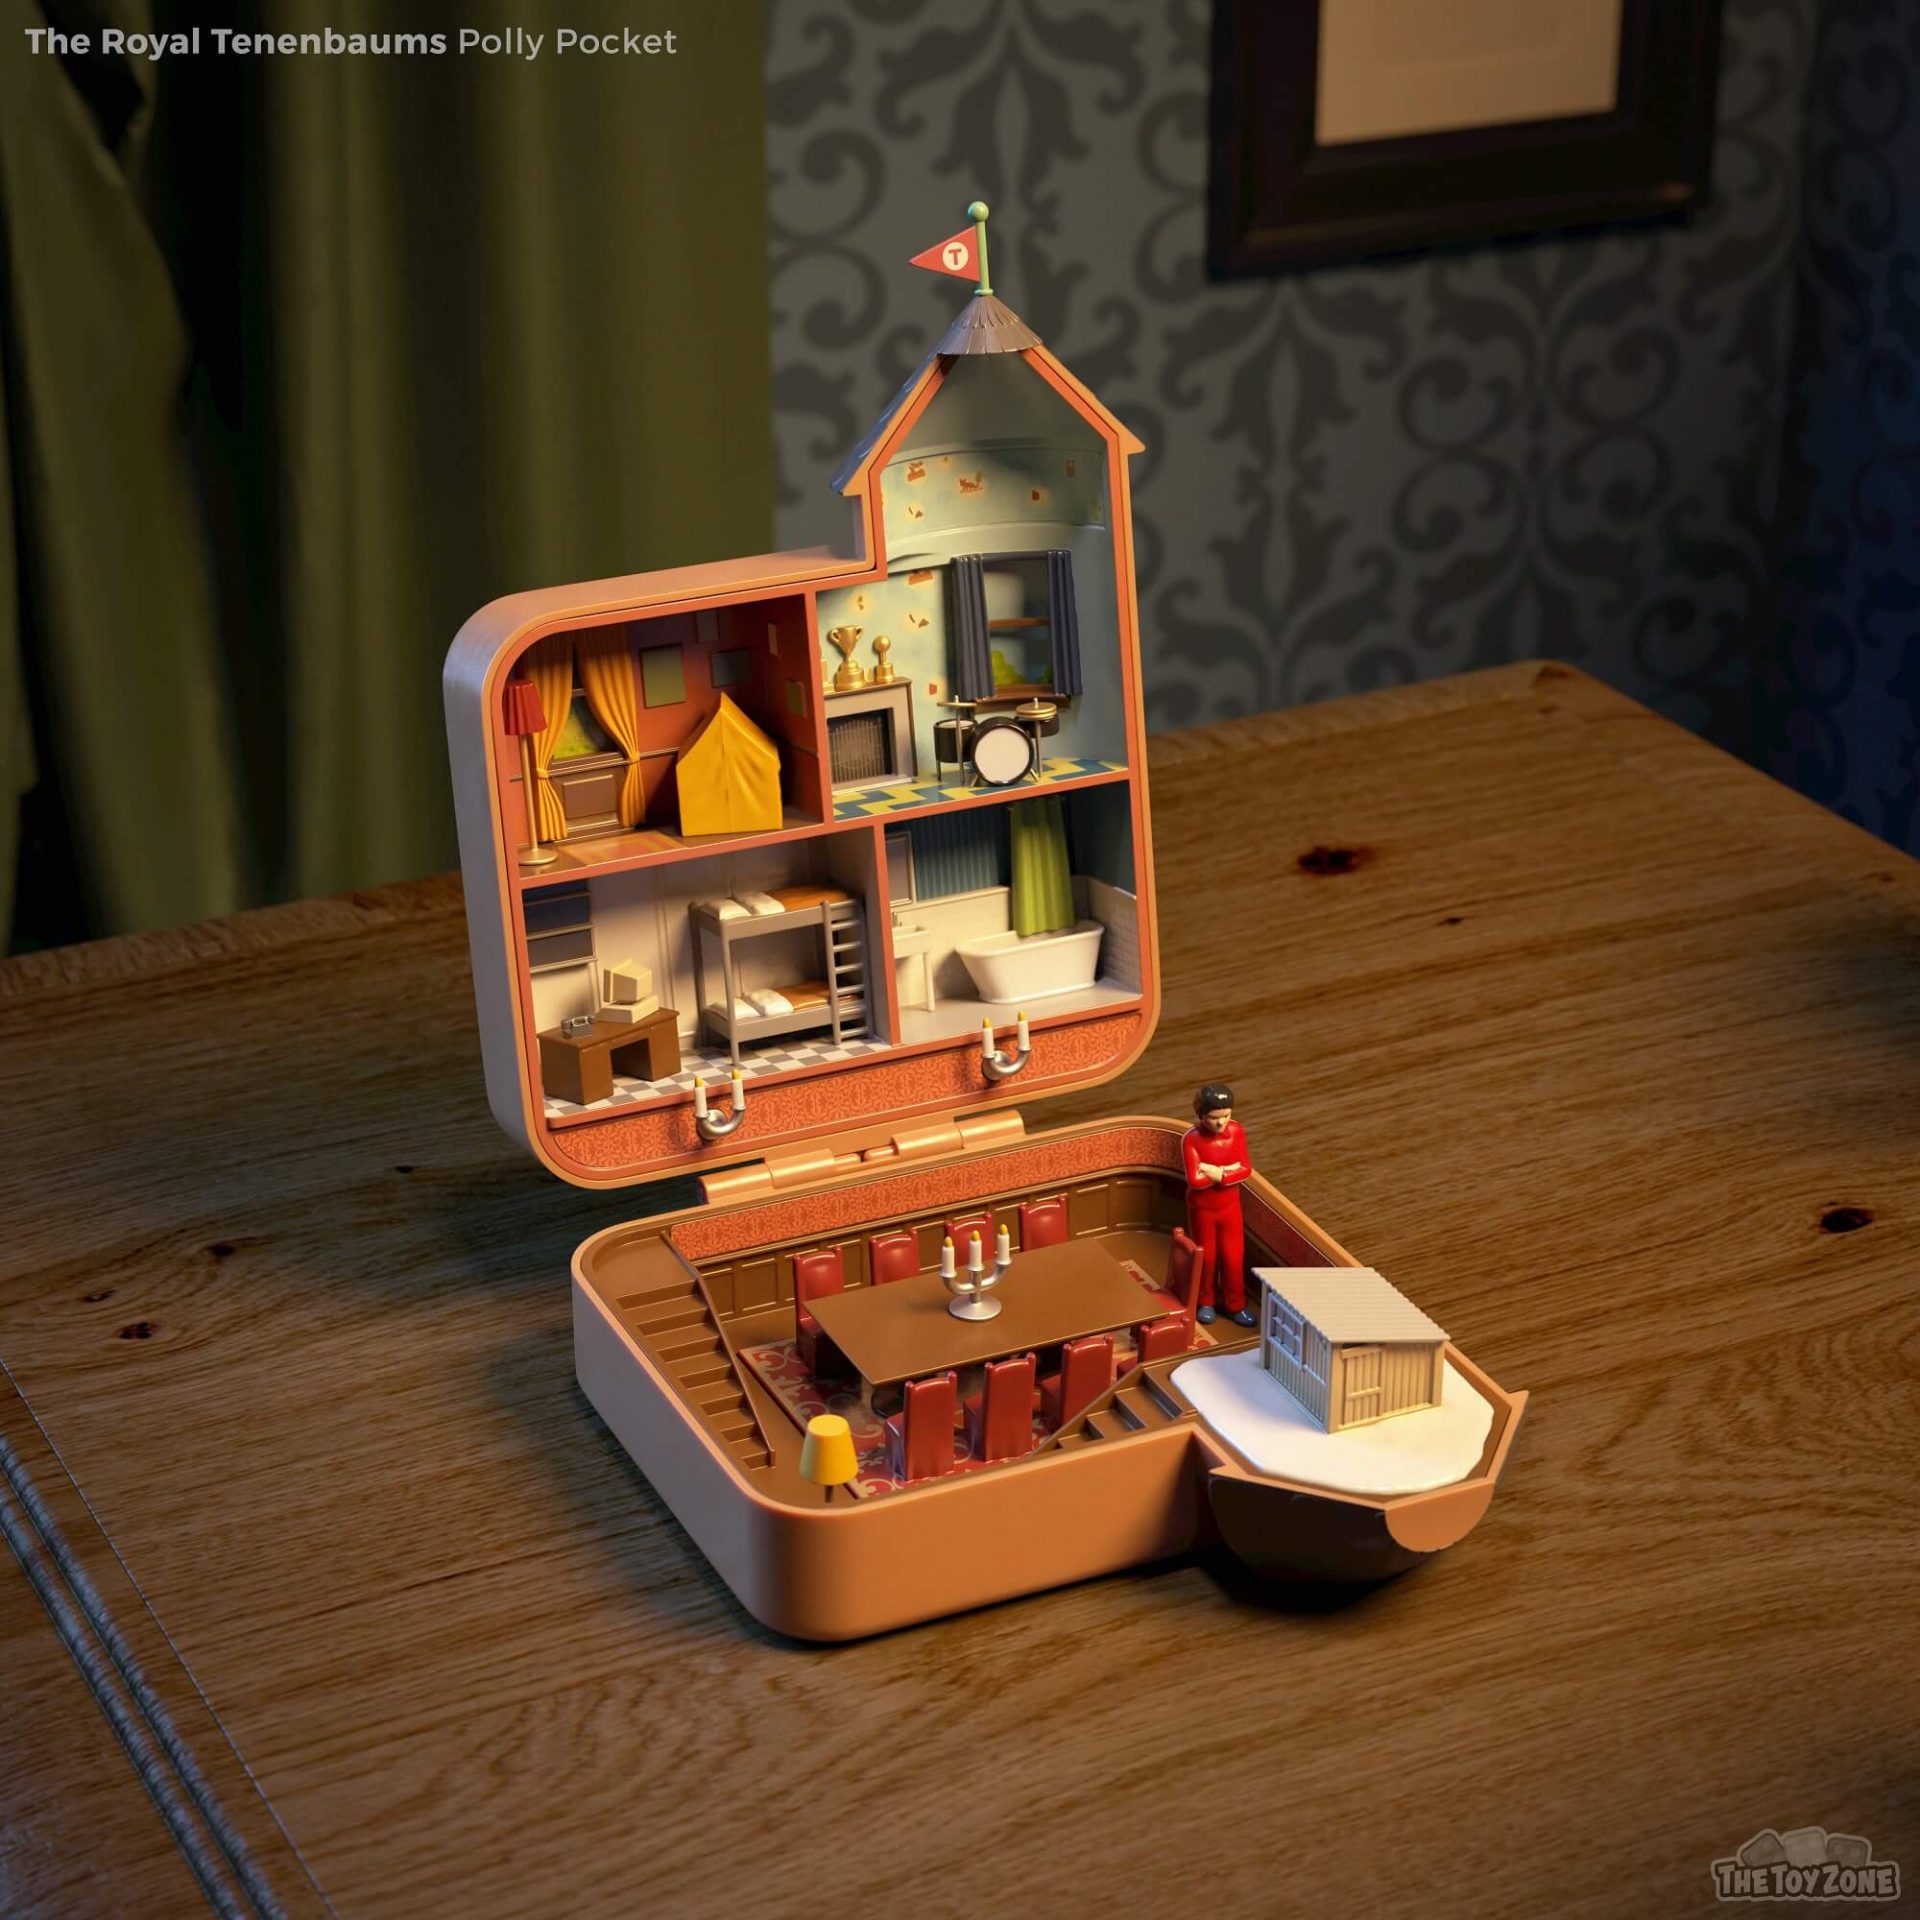 Fictional properties reimagined as Polly Pockets